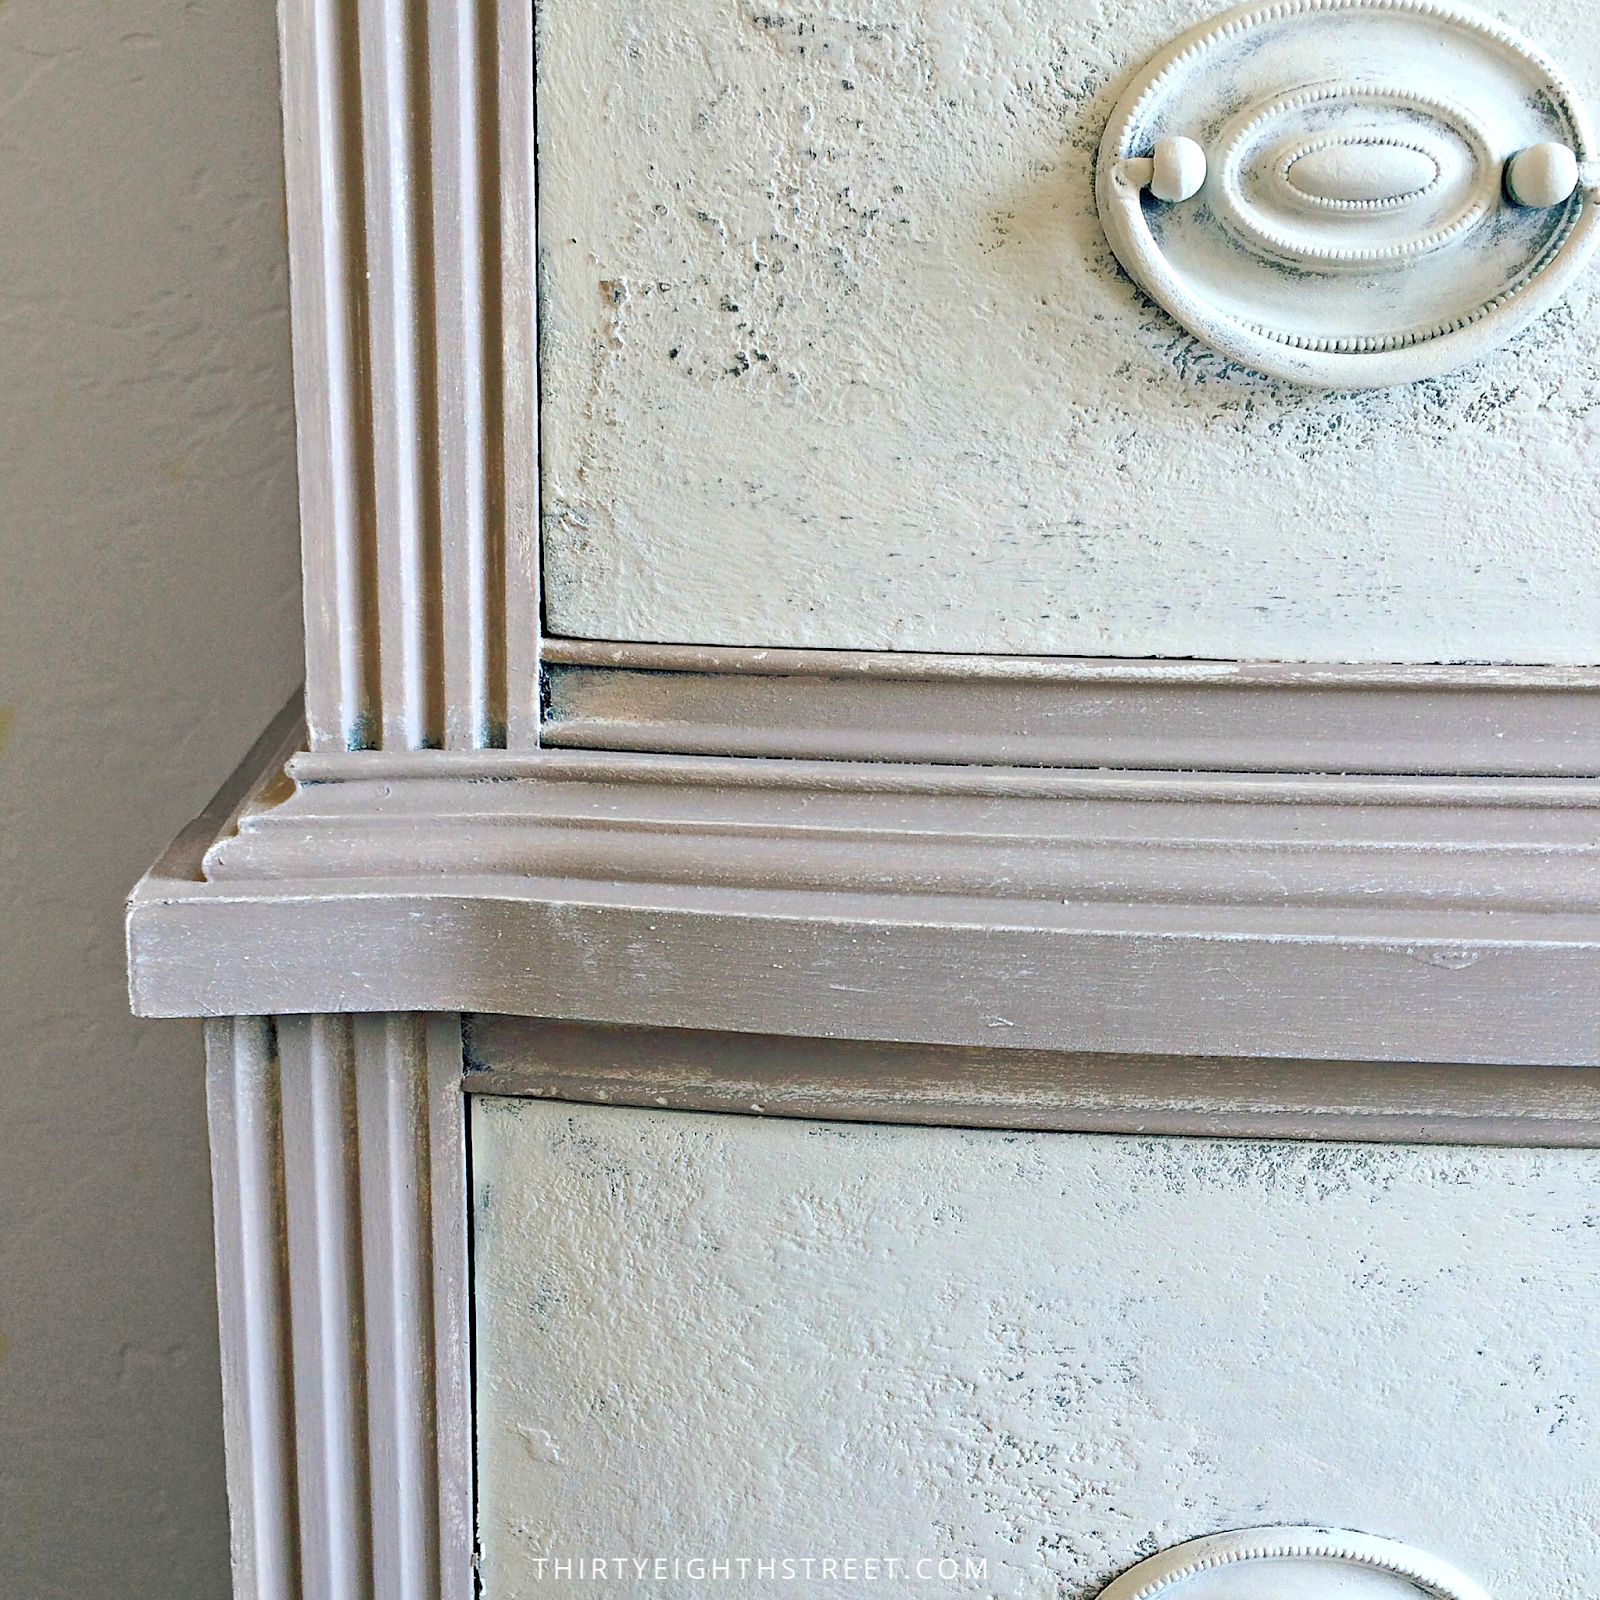 How to Paint Over Chalk Paint  No Sanding – Beautiful Results